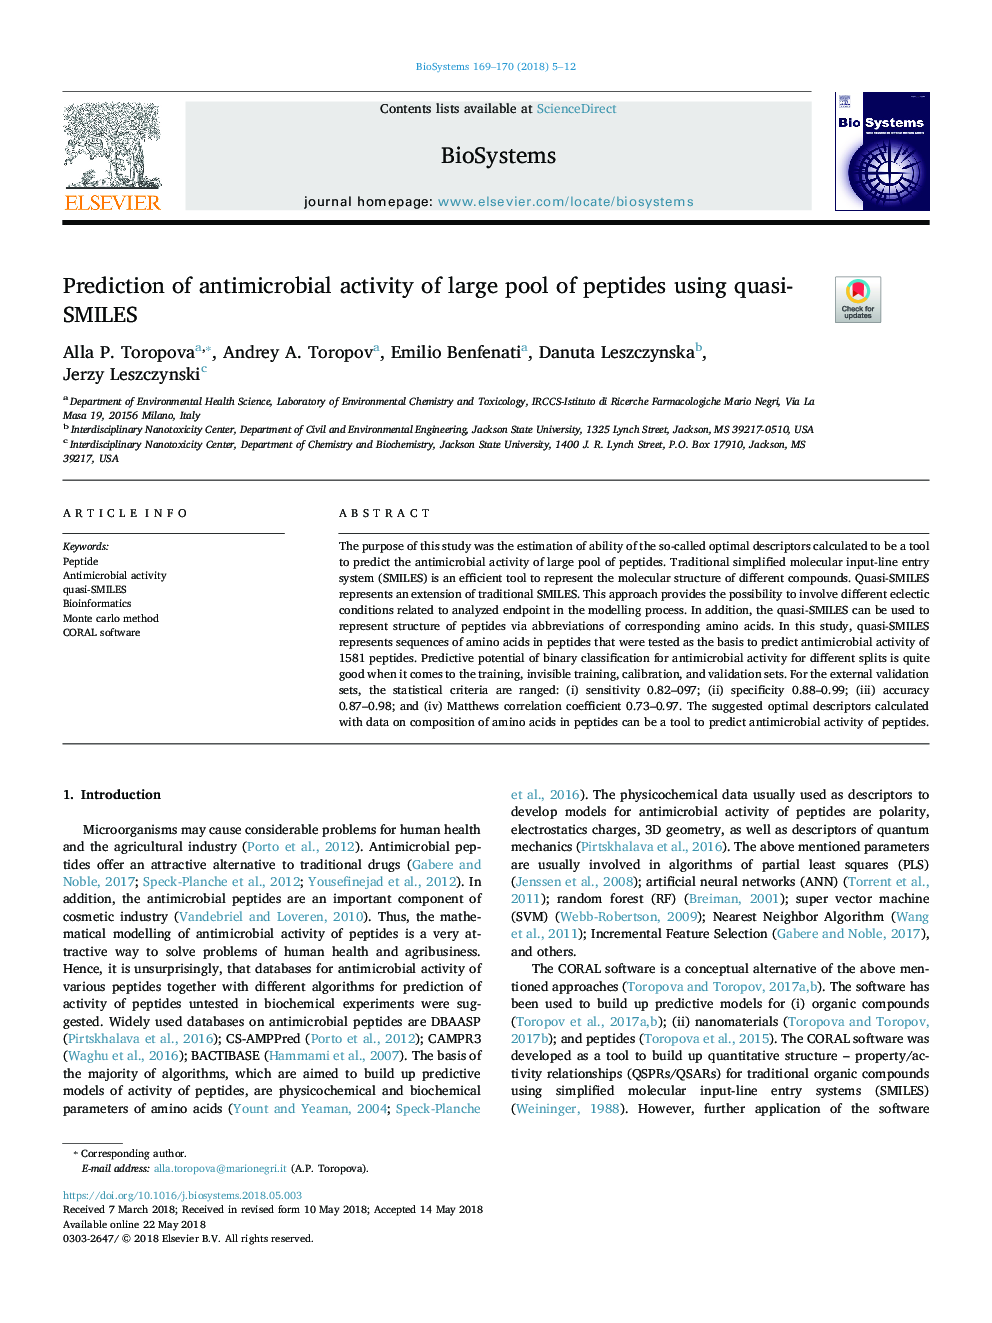 Prediction of antimicrobial activity of large pool of peptides using quasi-SMILES